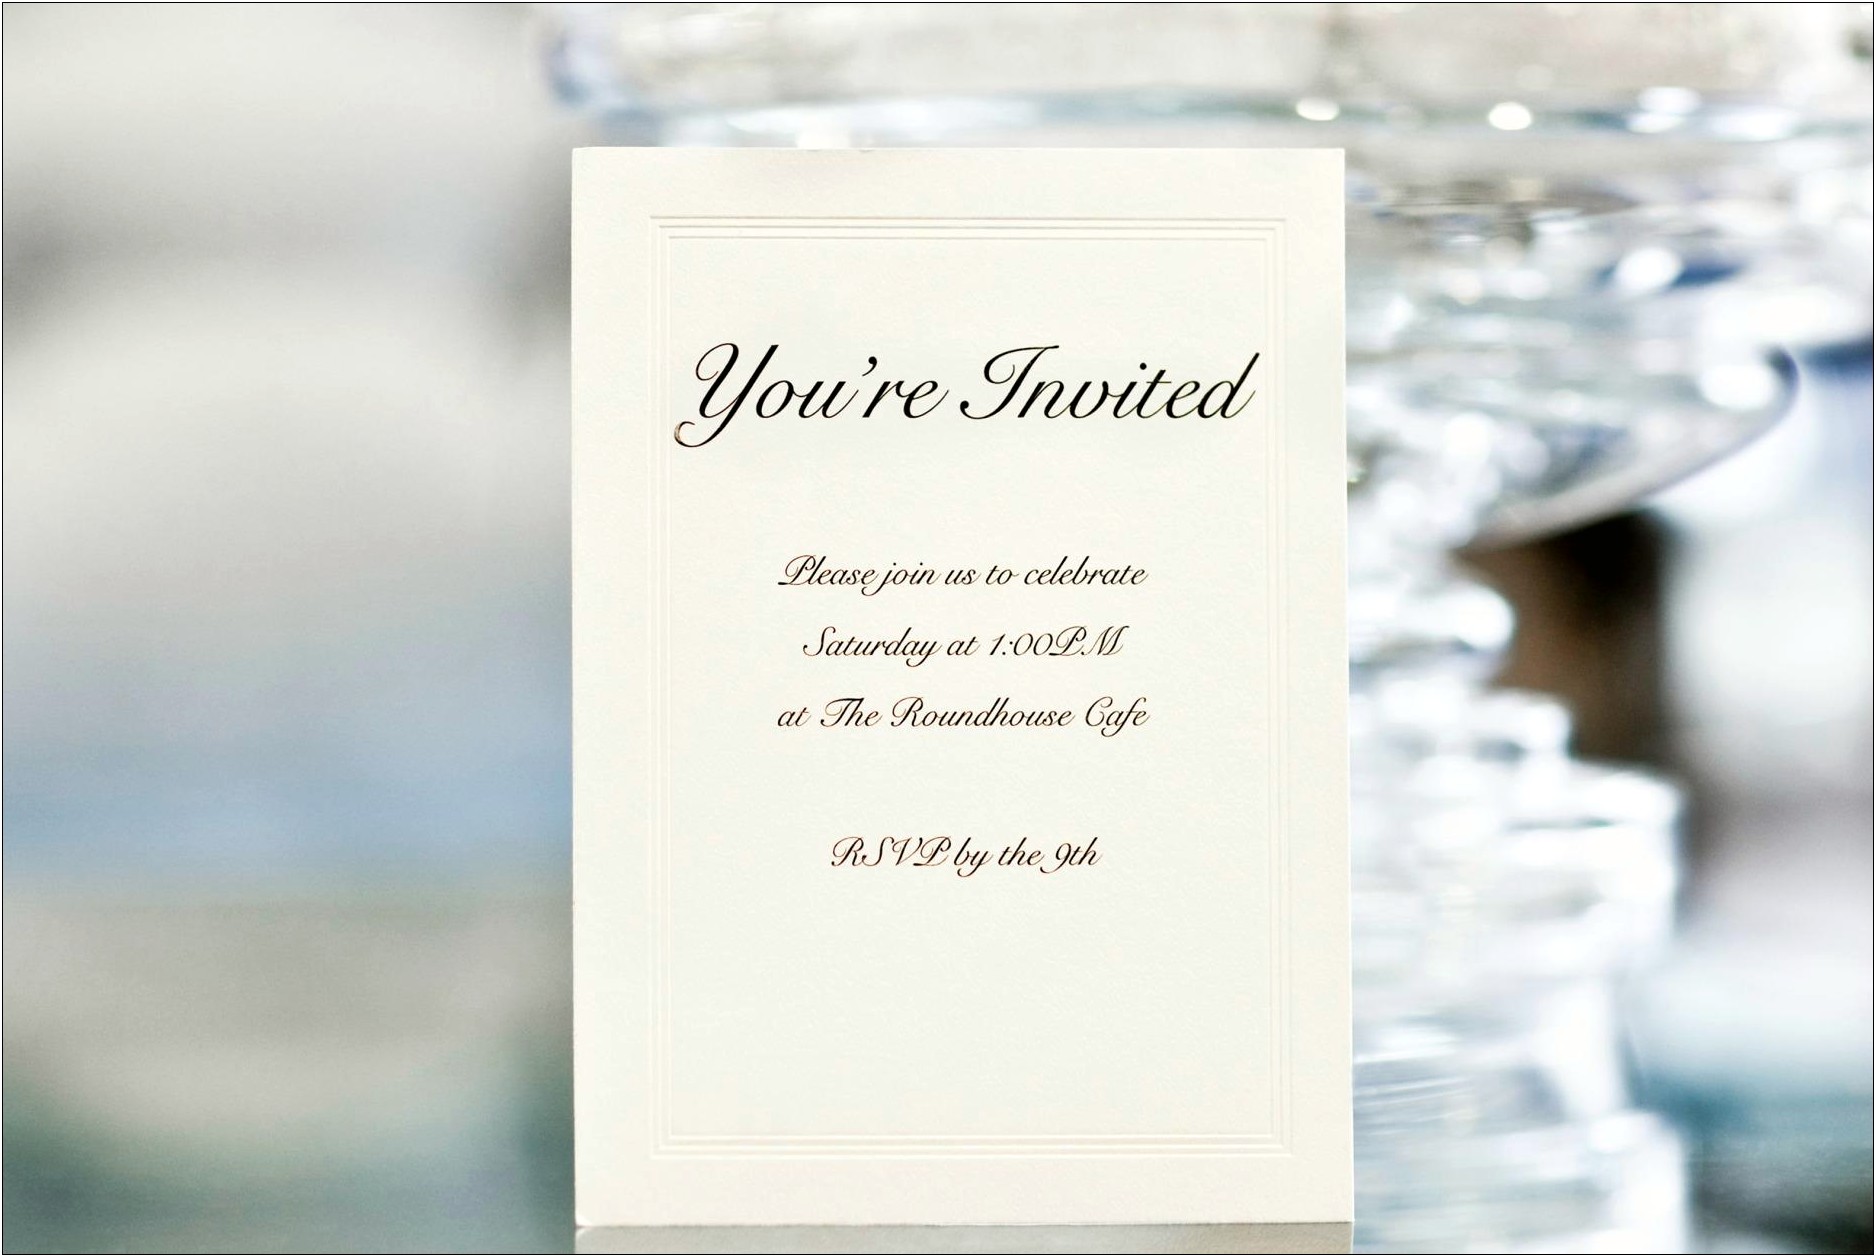 My Wedding Invitation Message For Friends